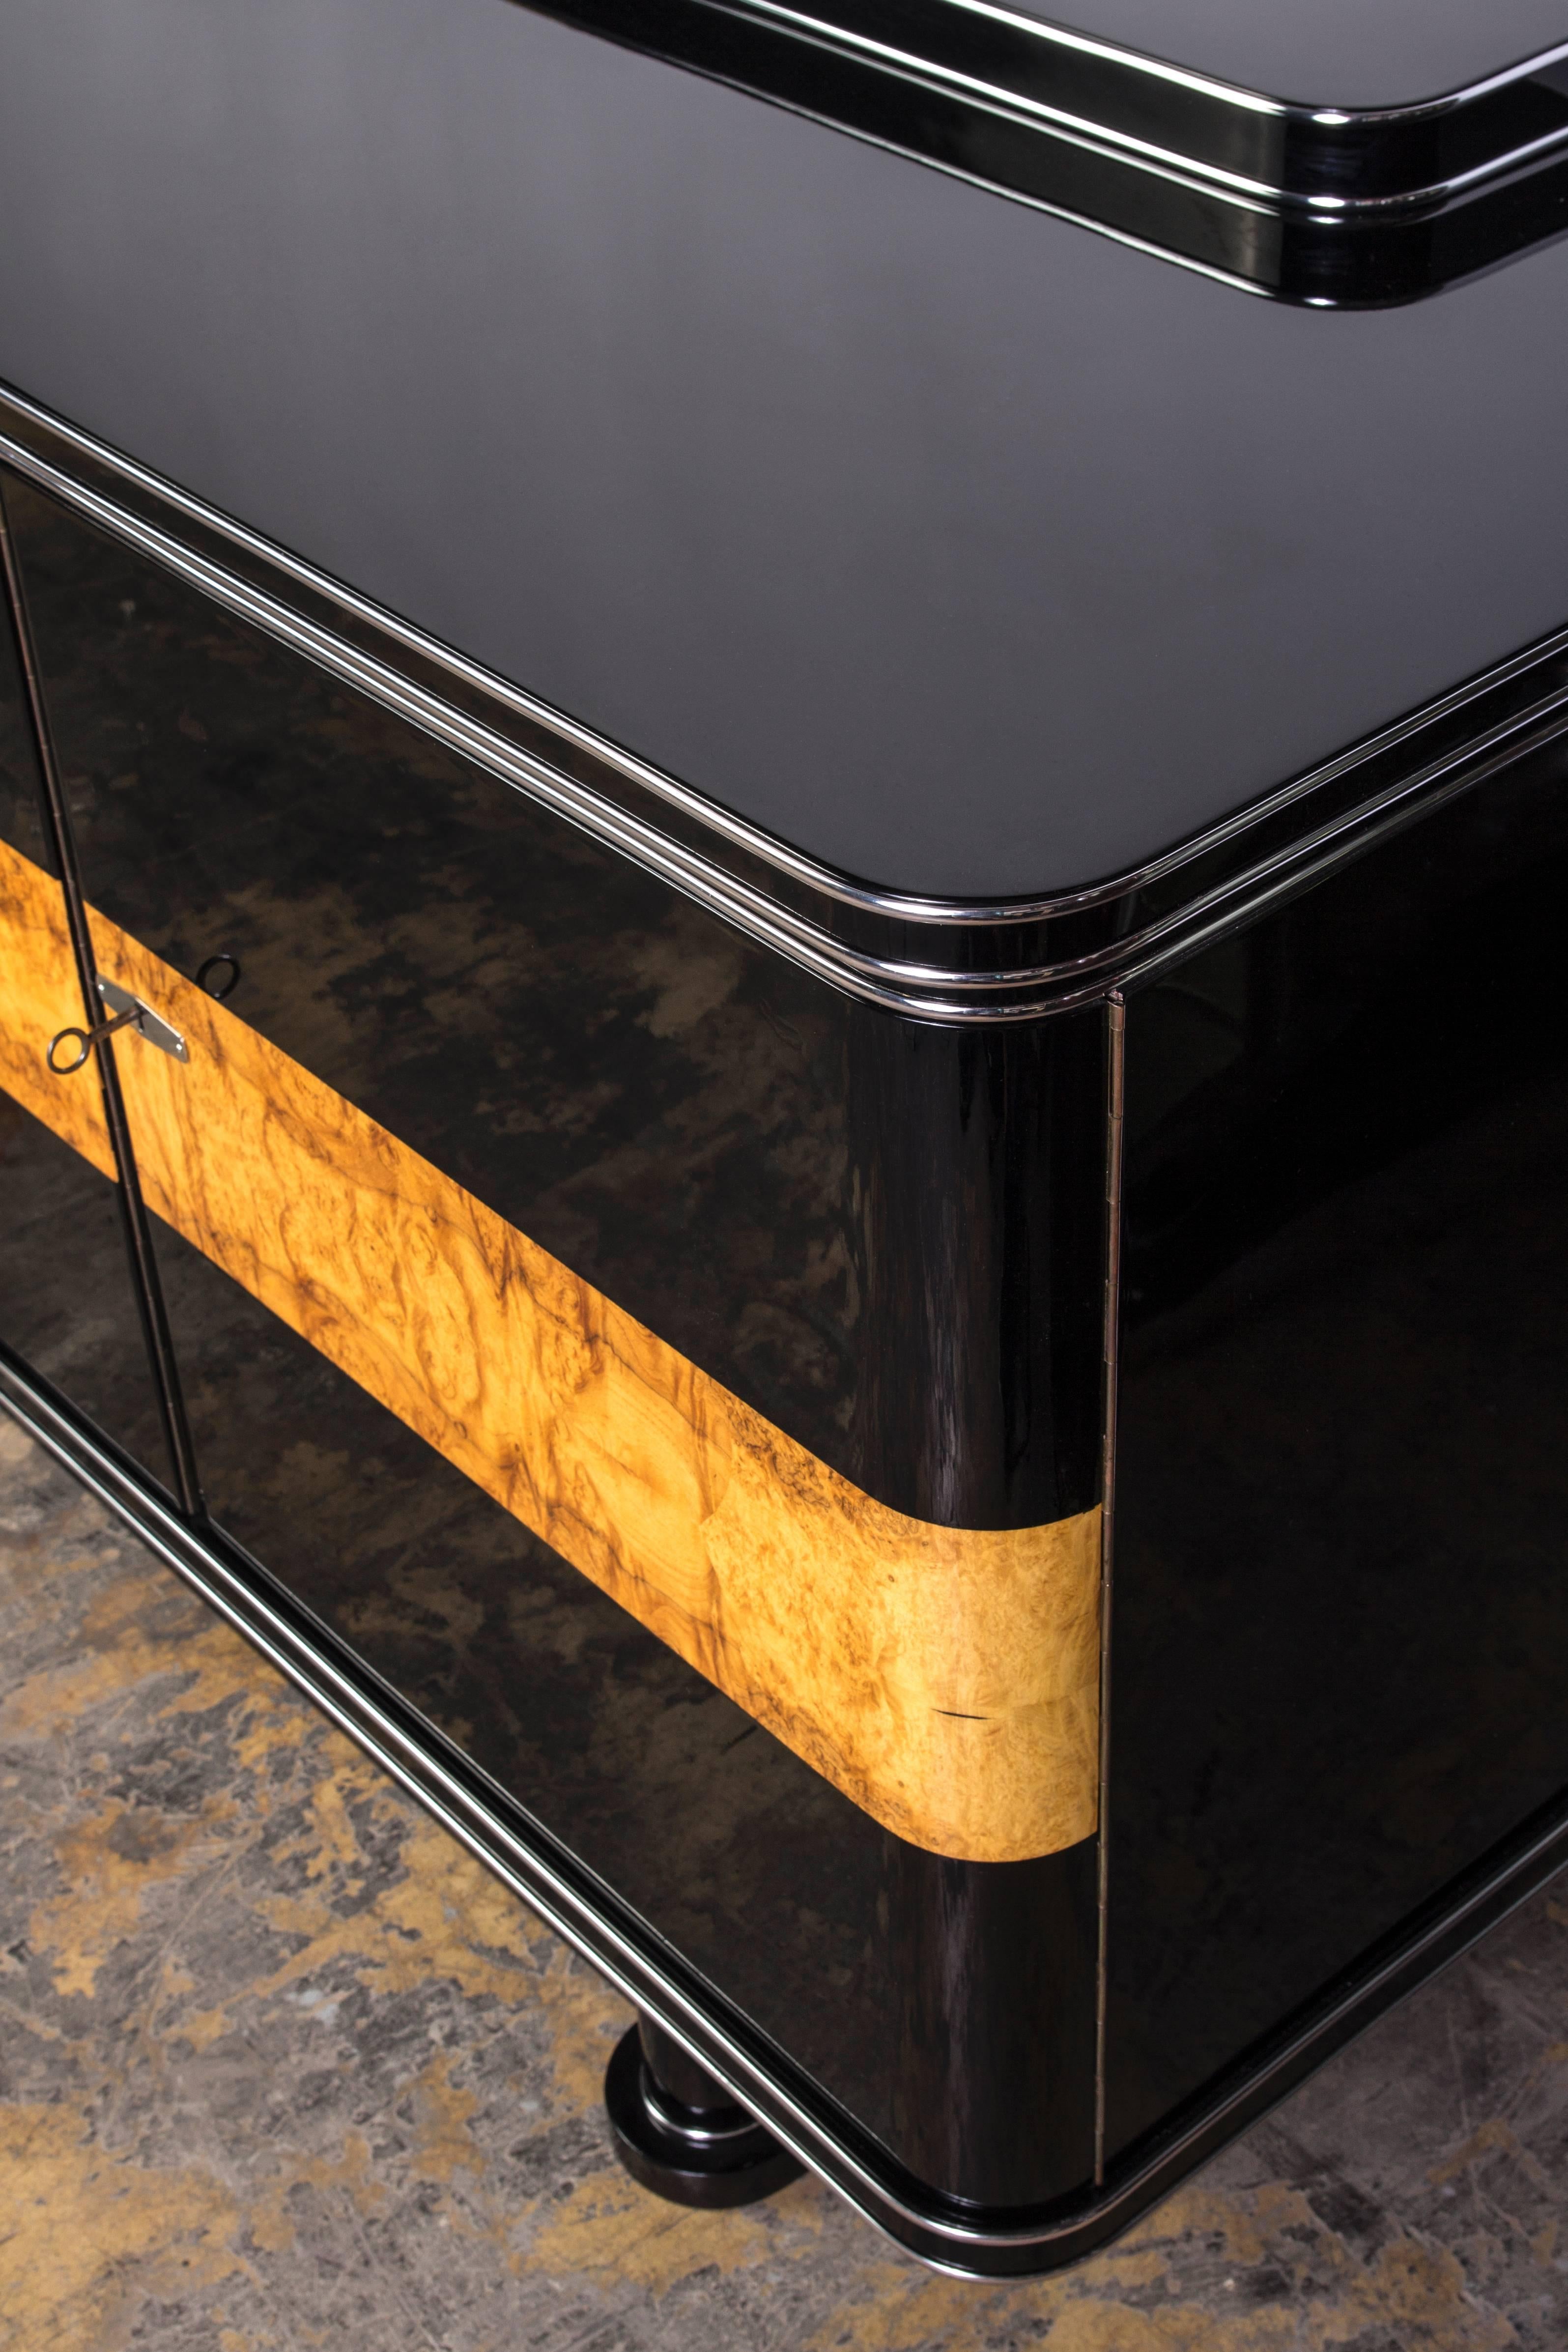 This colossal Art Deco sideboard depicts a very attractive two-tone combination of black piano lacquer and Loupe d’Amboine with chrome-line details. The interior is beautifully finished in cherrywood and burl for plenty of storage and drawers.